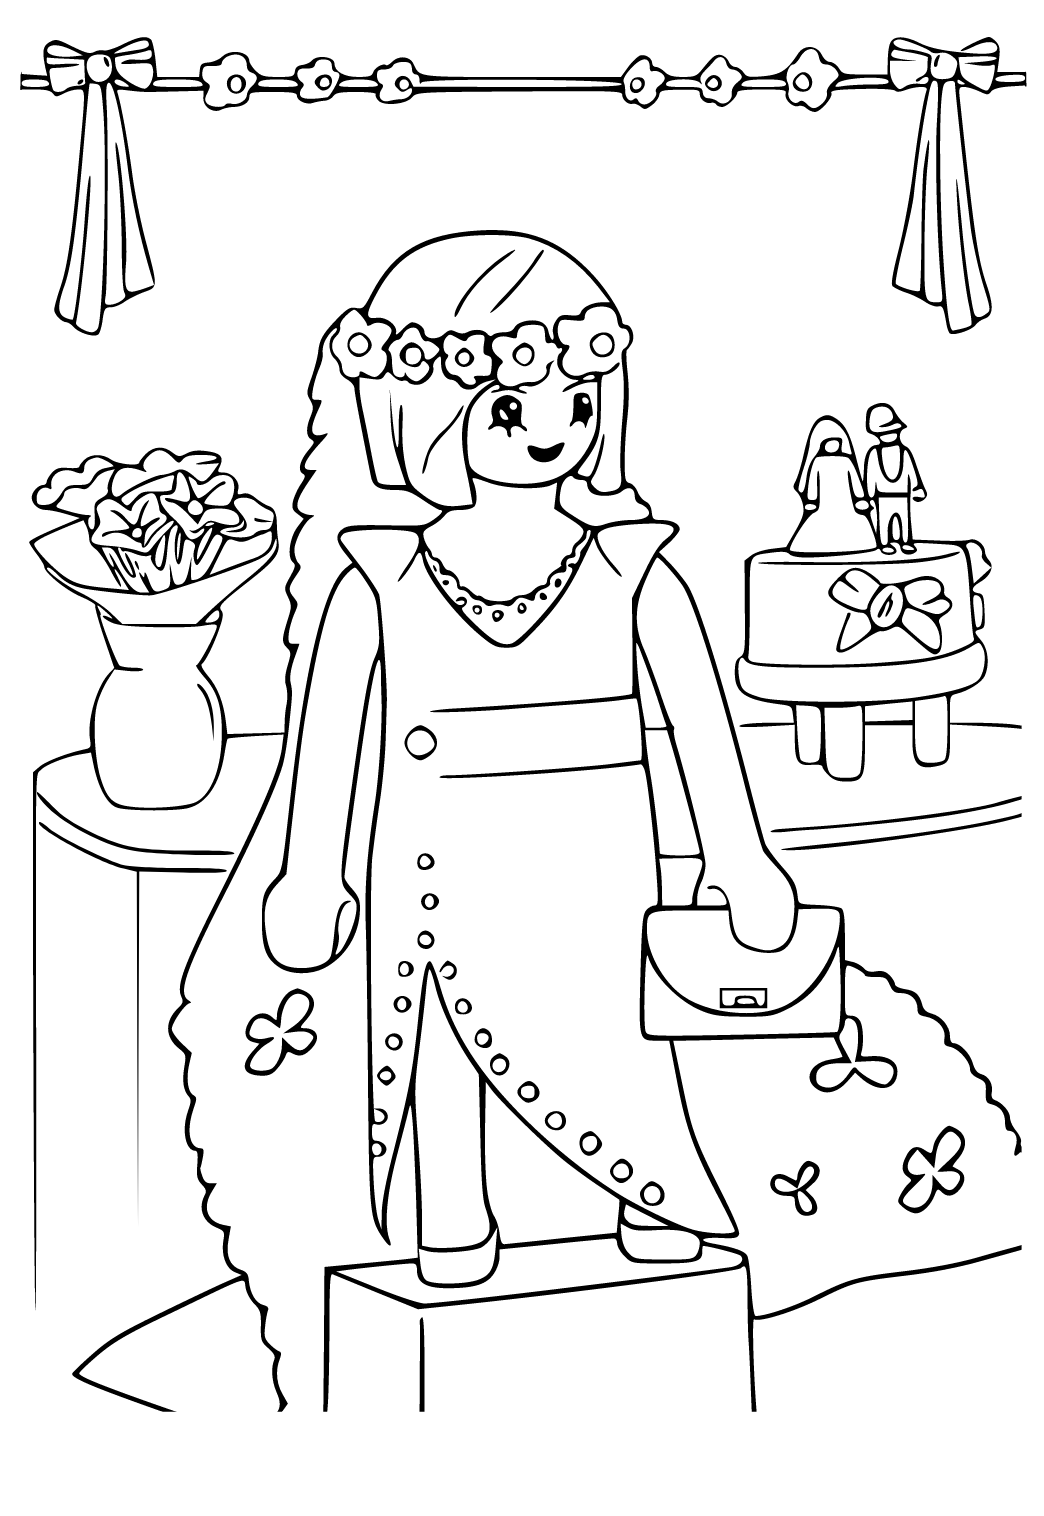 Free Printable Playmobil Bride Coloring Page, Sheet and Picture for Adults  and Kids (Girls and Boys) - Babeled.com